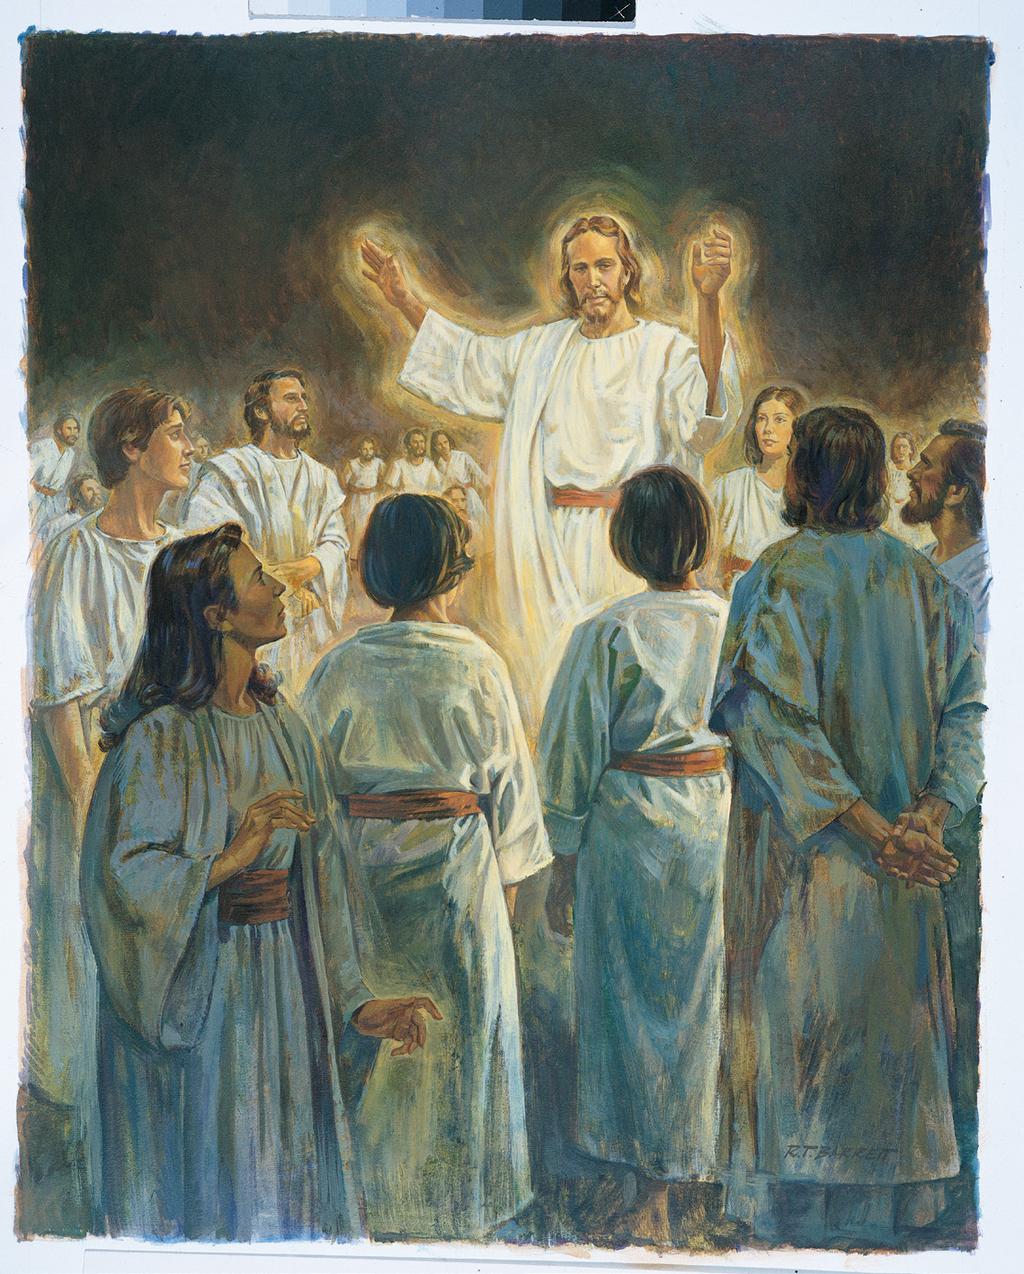 ILLUSTRATION BY ROBERT BARRETT He organized his forces and appointed messengers, clothed with power and authority, and commissioned them to go forth and carry the light of the gospel to them that